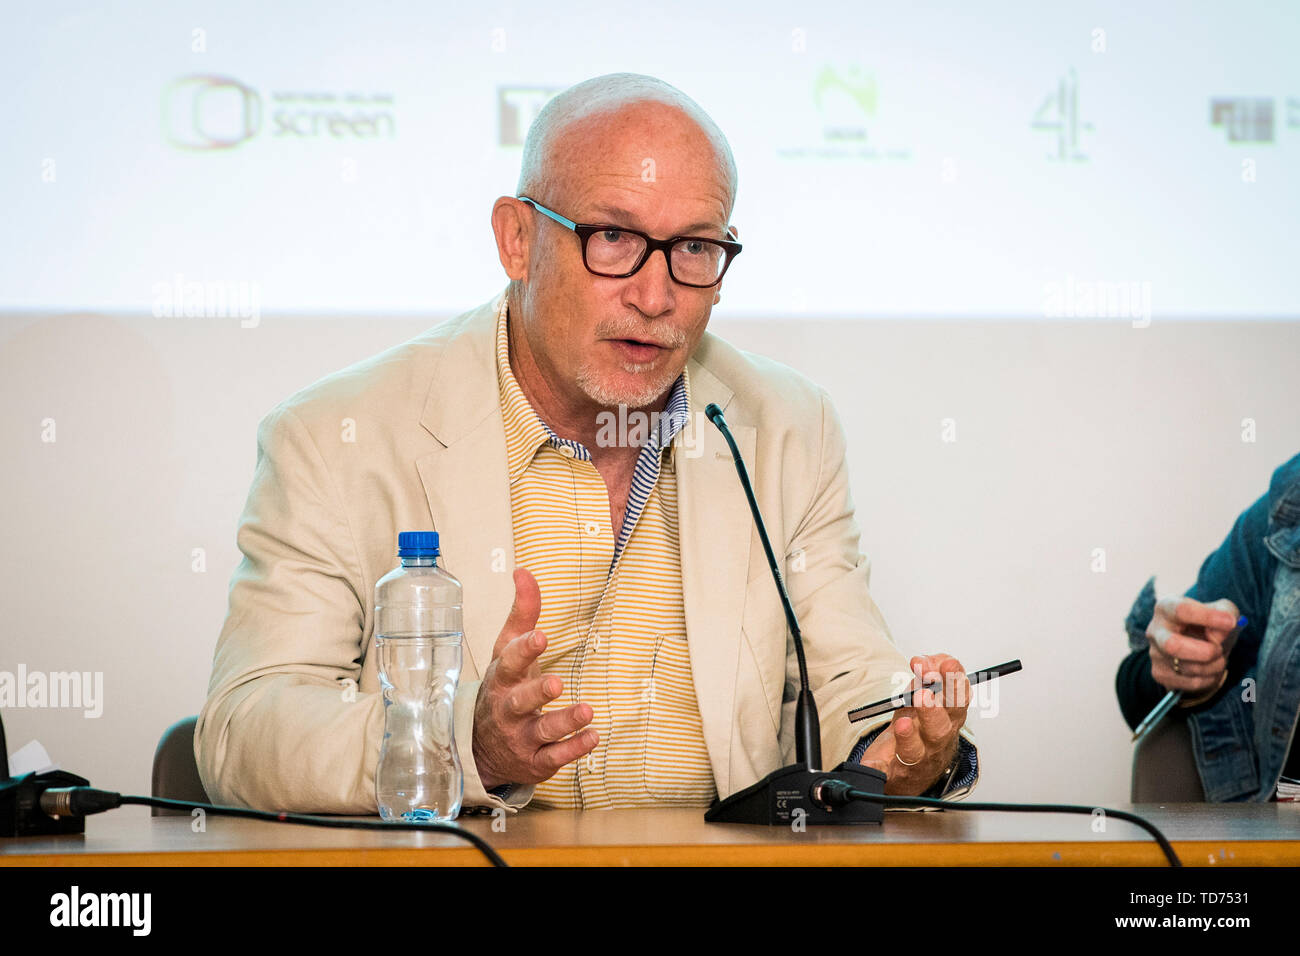 Alex Gibney, director of, “No Stone Unturned,” speaking during a discussion in the Ulster Museum hosted by Docs Ireland, on freedom of the press called, “Are Investigative Journalists Safe to Work in Ireland?”. Stock Photo